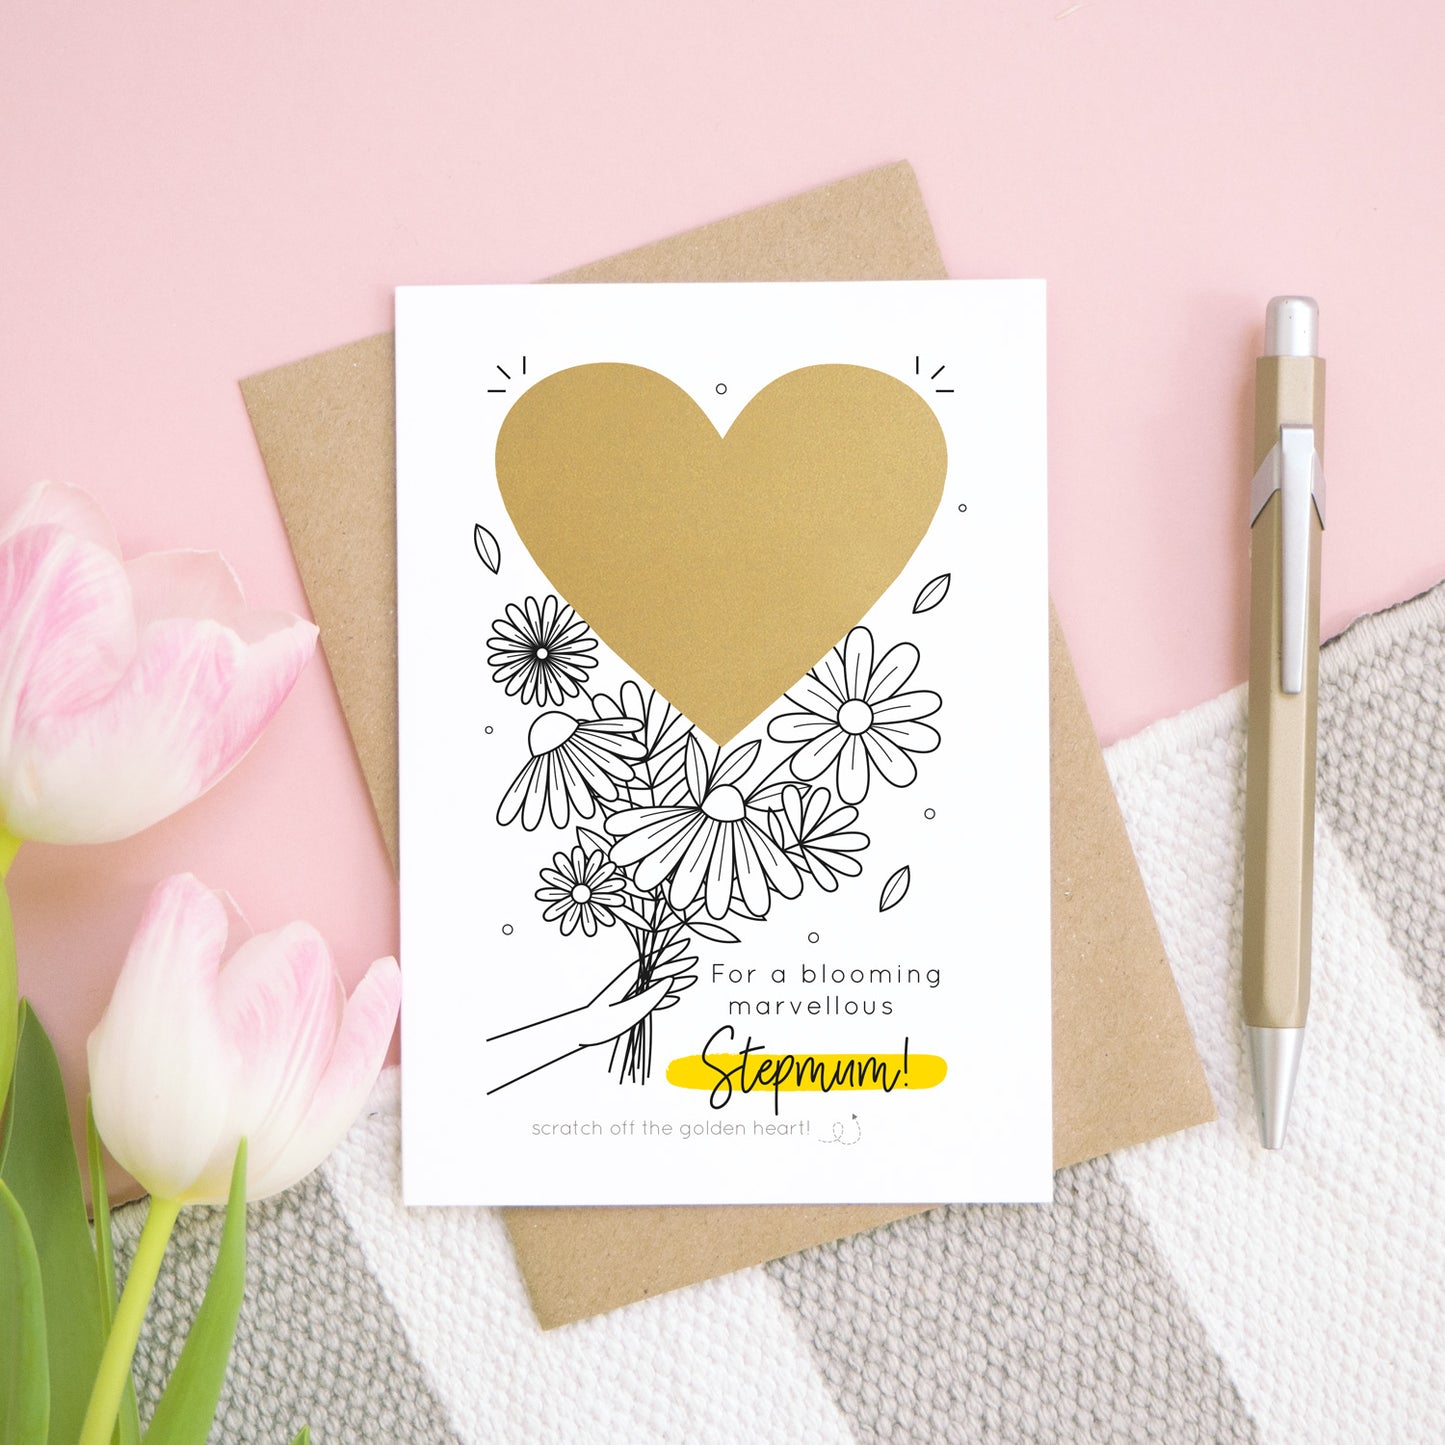 A personalised blooming marvellous scratch card lying flat on top of its kraft brown envelope on a pink, white and grey background. There are pink tulips to the left and a pen to the right for scale. The heart is still in it’s solid form hiding the scratch off message.